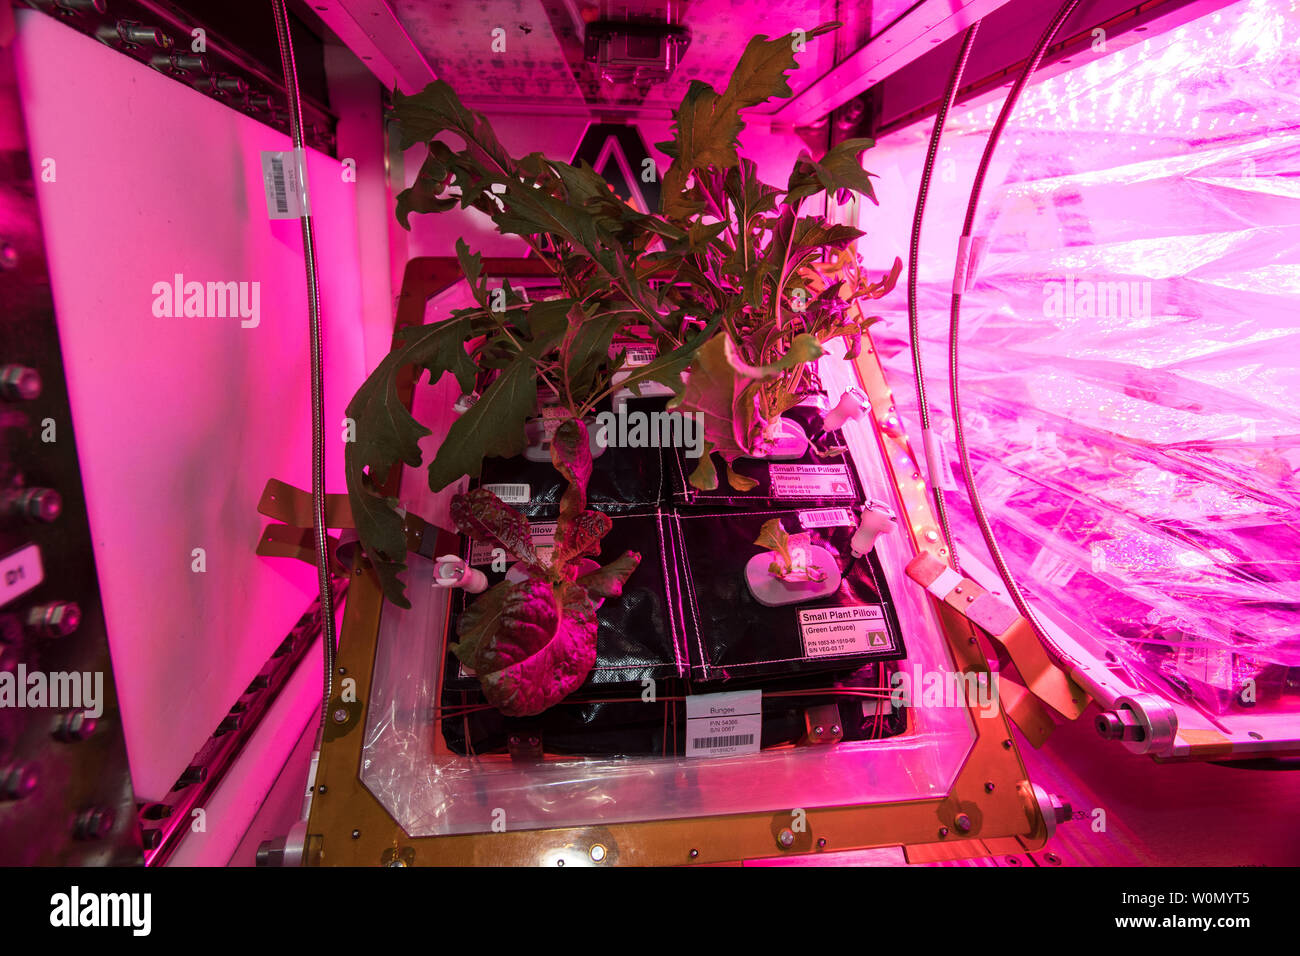 The crew aboard the International Space Station have grown two batches of mixed greens (mizuna, red romaine lettuce and tokyo bekana cabbage), and are now running two Veggie facilities simultaneously. Organisms grow differently in space, from single-celled bacteria to plants and humans. But future long-duration space missions will require crew members to grow their own food, so understanding how plants respond to microgravity is an important step toward that goal. The Veg-03 experiment uses the Veggie plant growth facility to cultivate a type of cabbage, lettuce and mizuna which are harvested Stock Photo